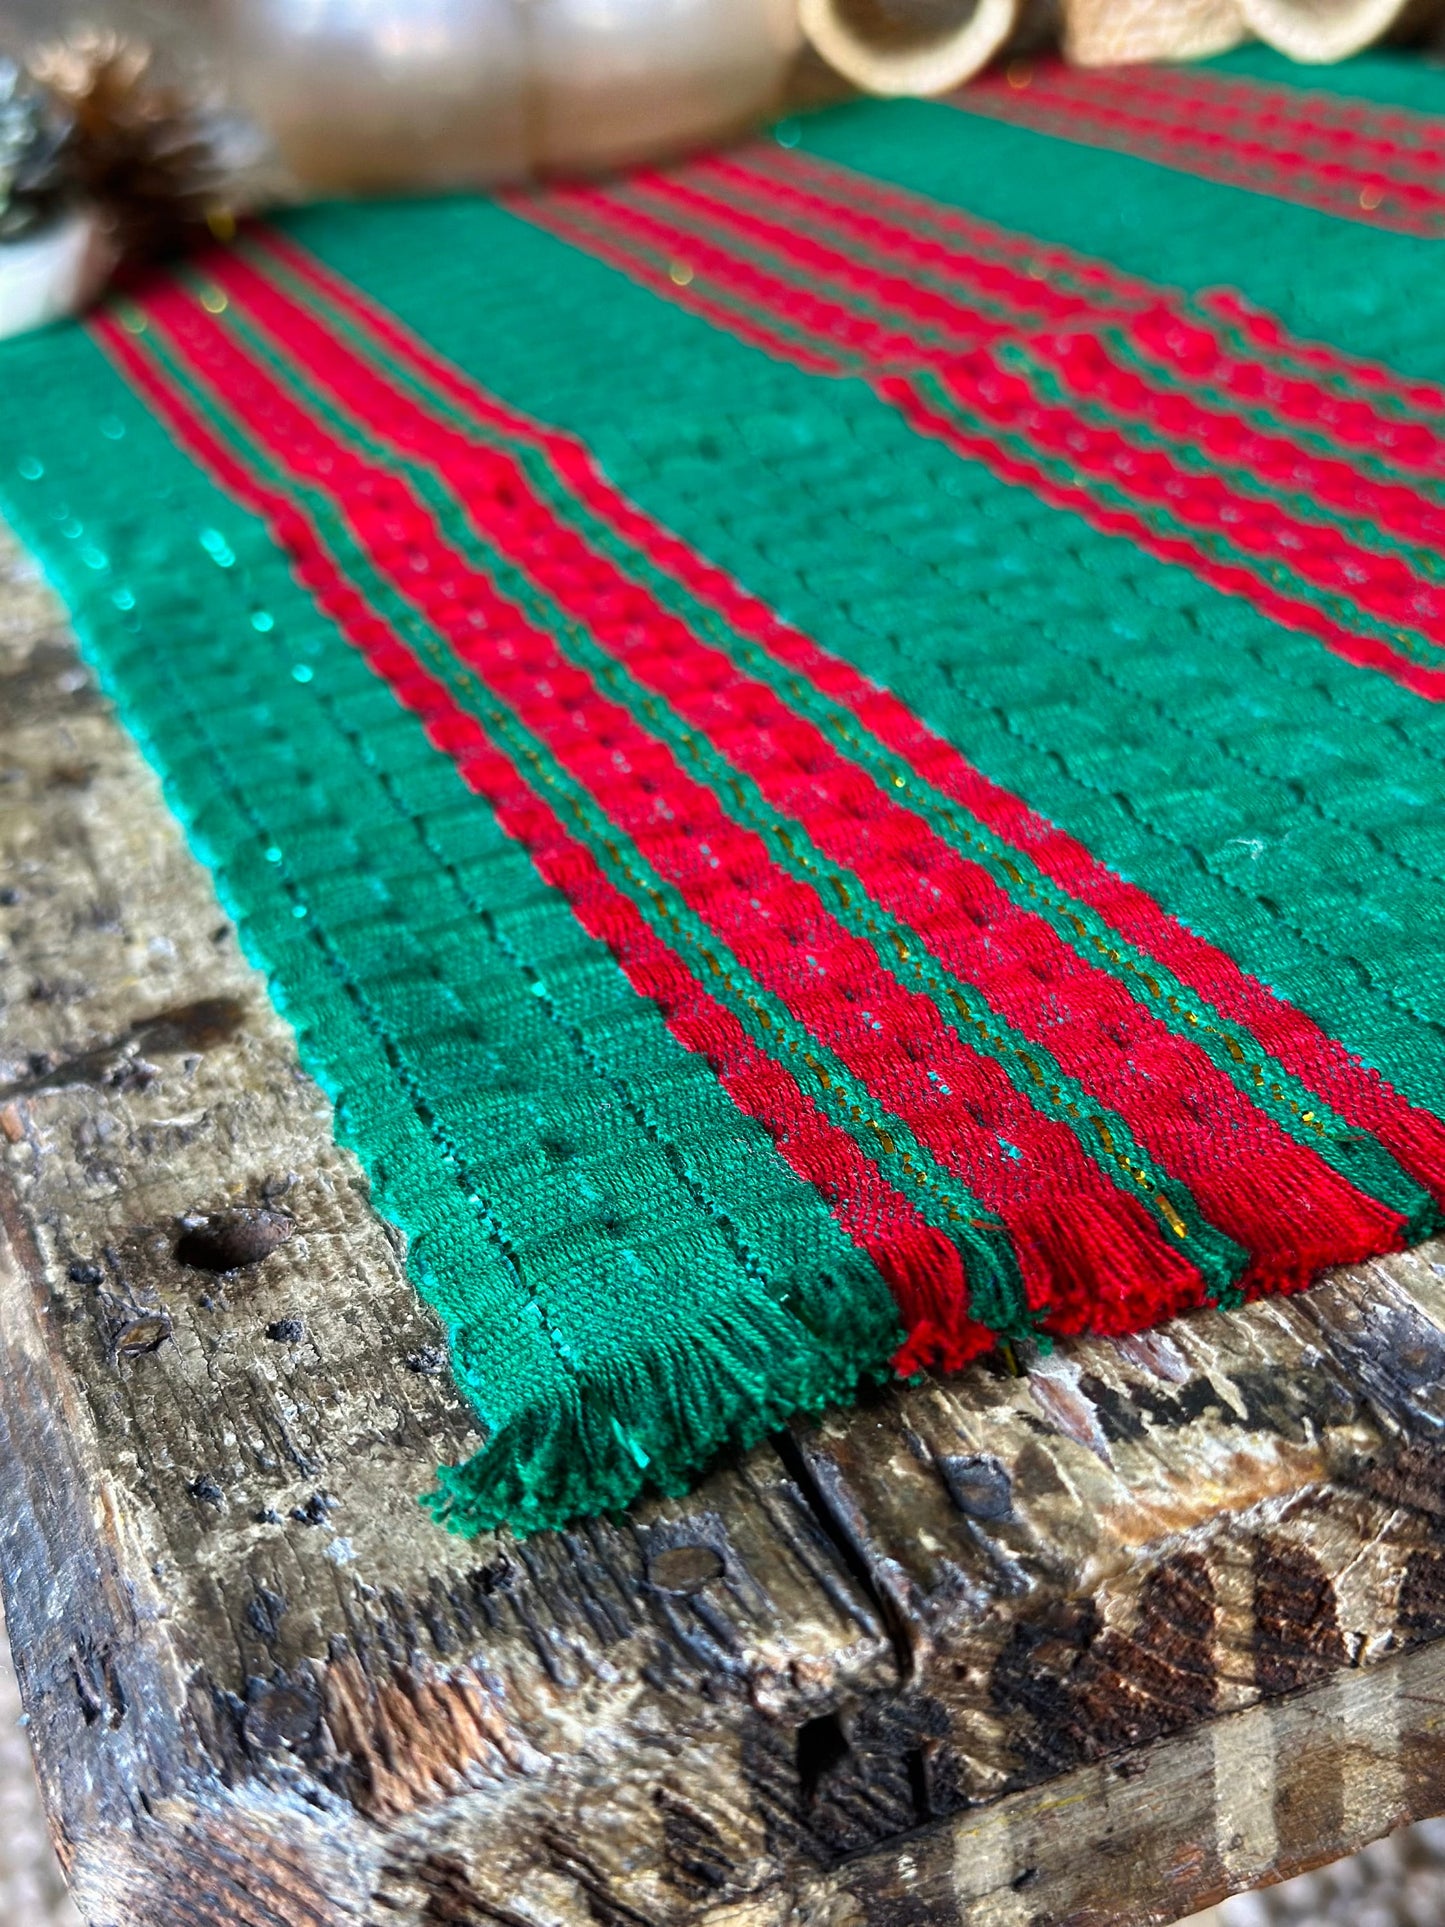 Handwoven placemats